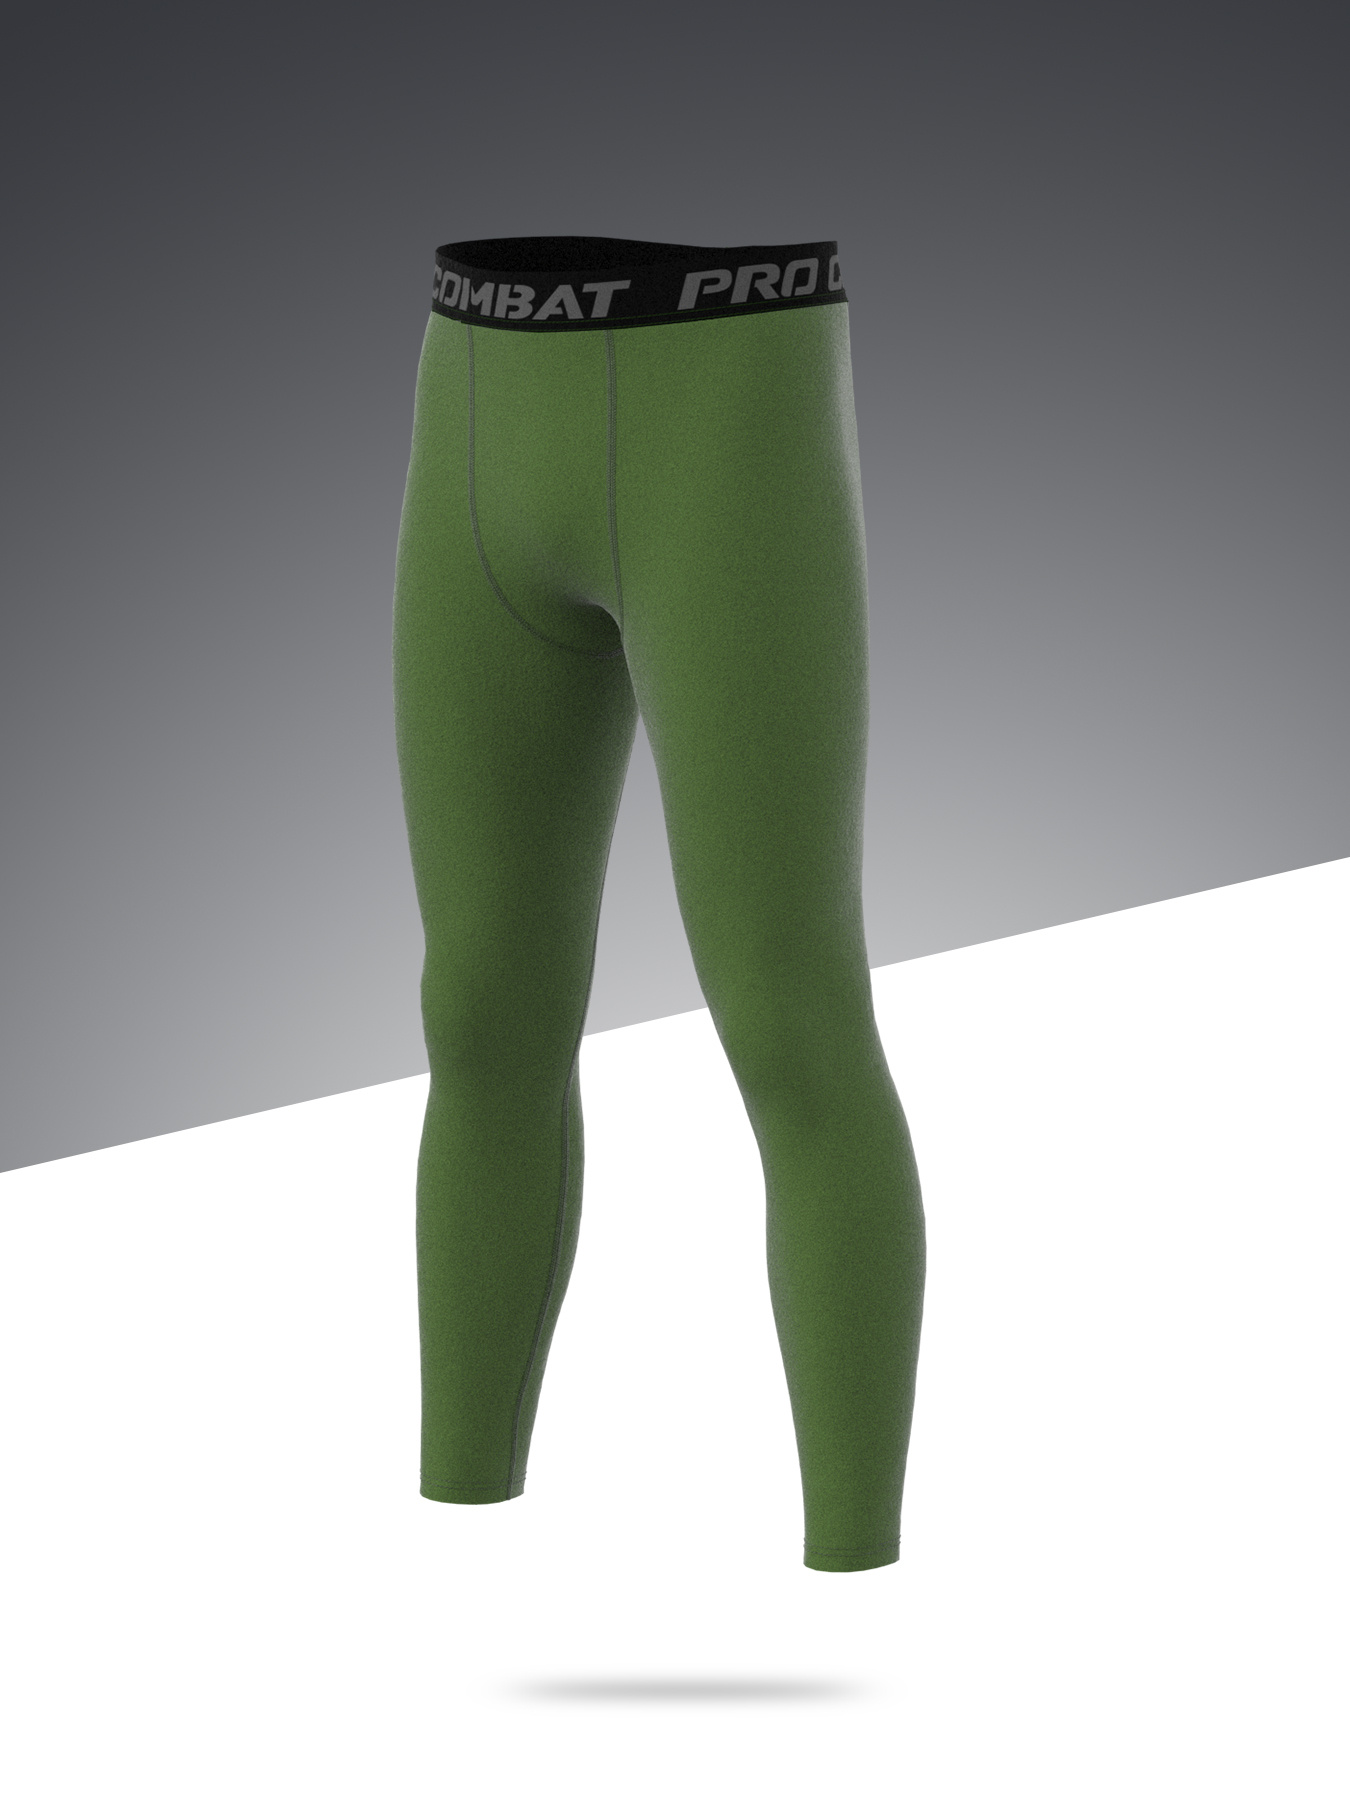  Boys Leggings Quick Dry Youth Compression Pants